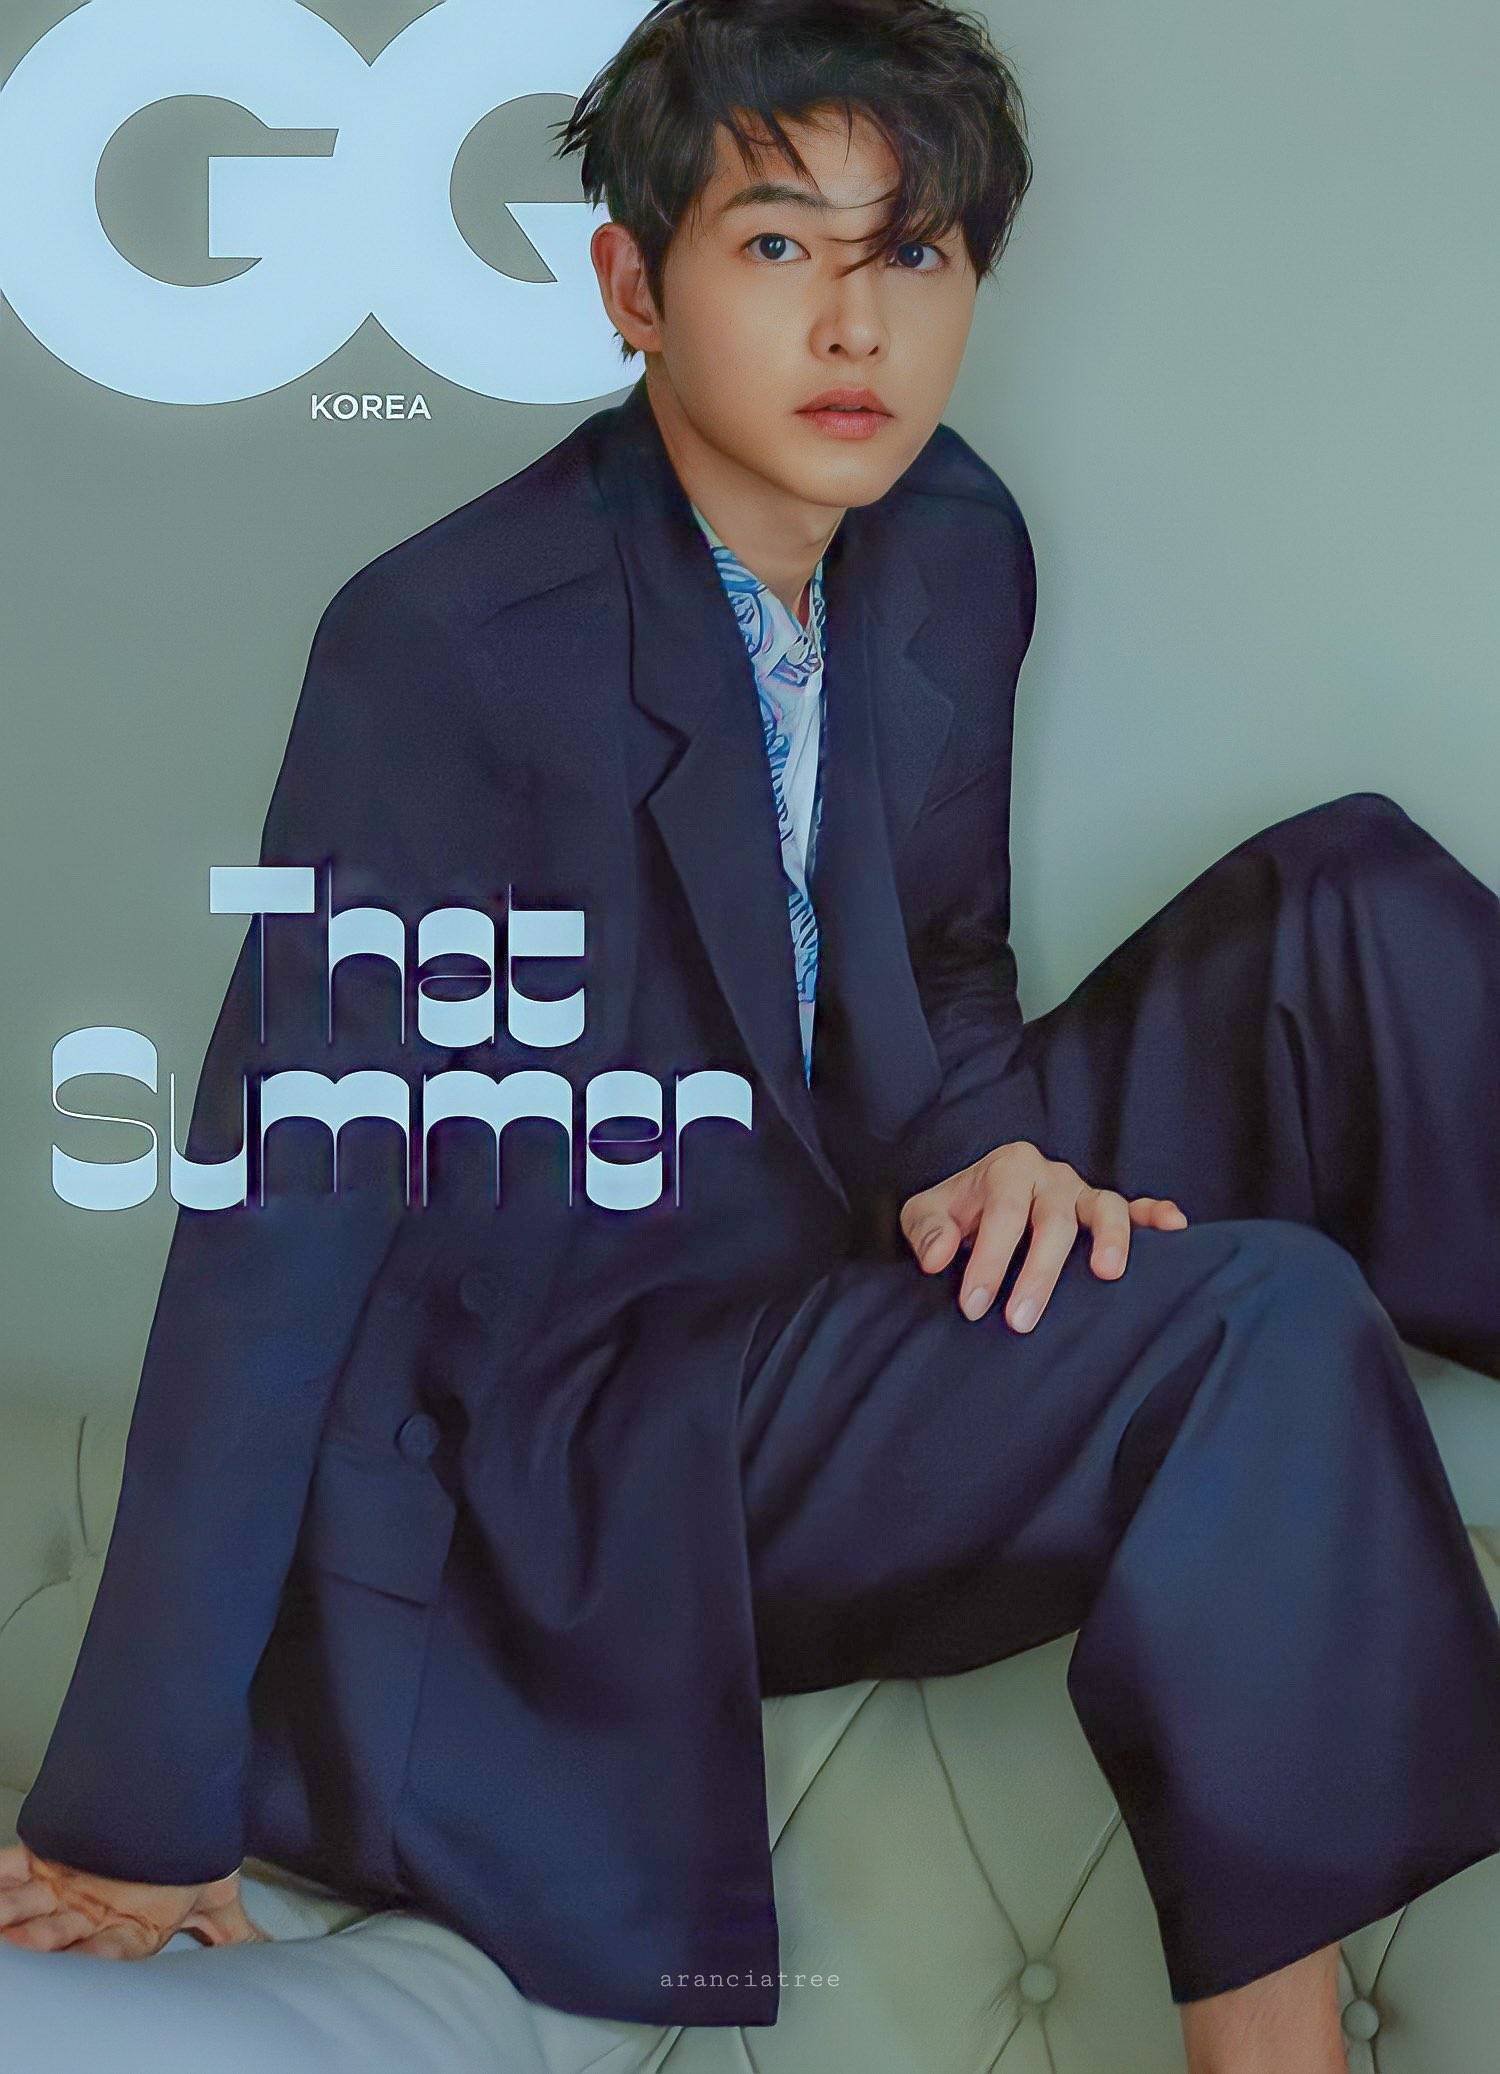 Song Joong Ki's 'GQ' magazine photoshoot in collaboration with 'Louis  Vuitton' is released